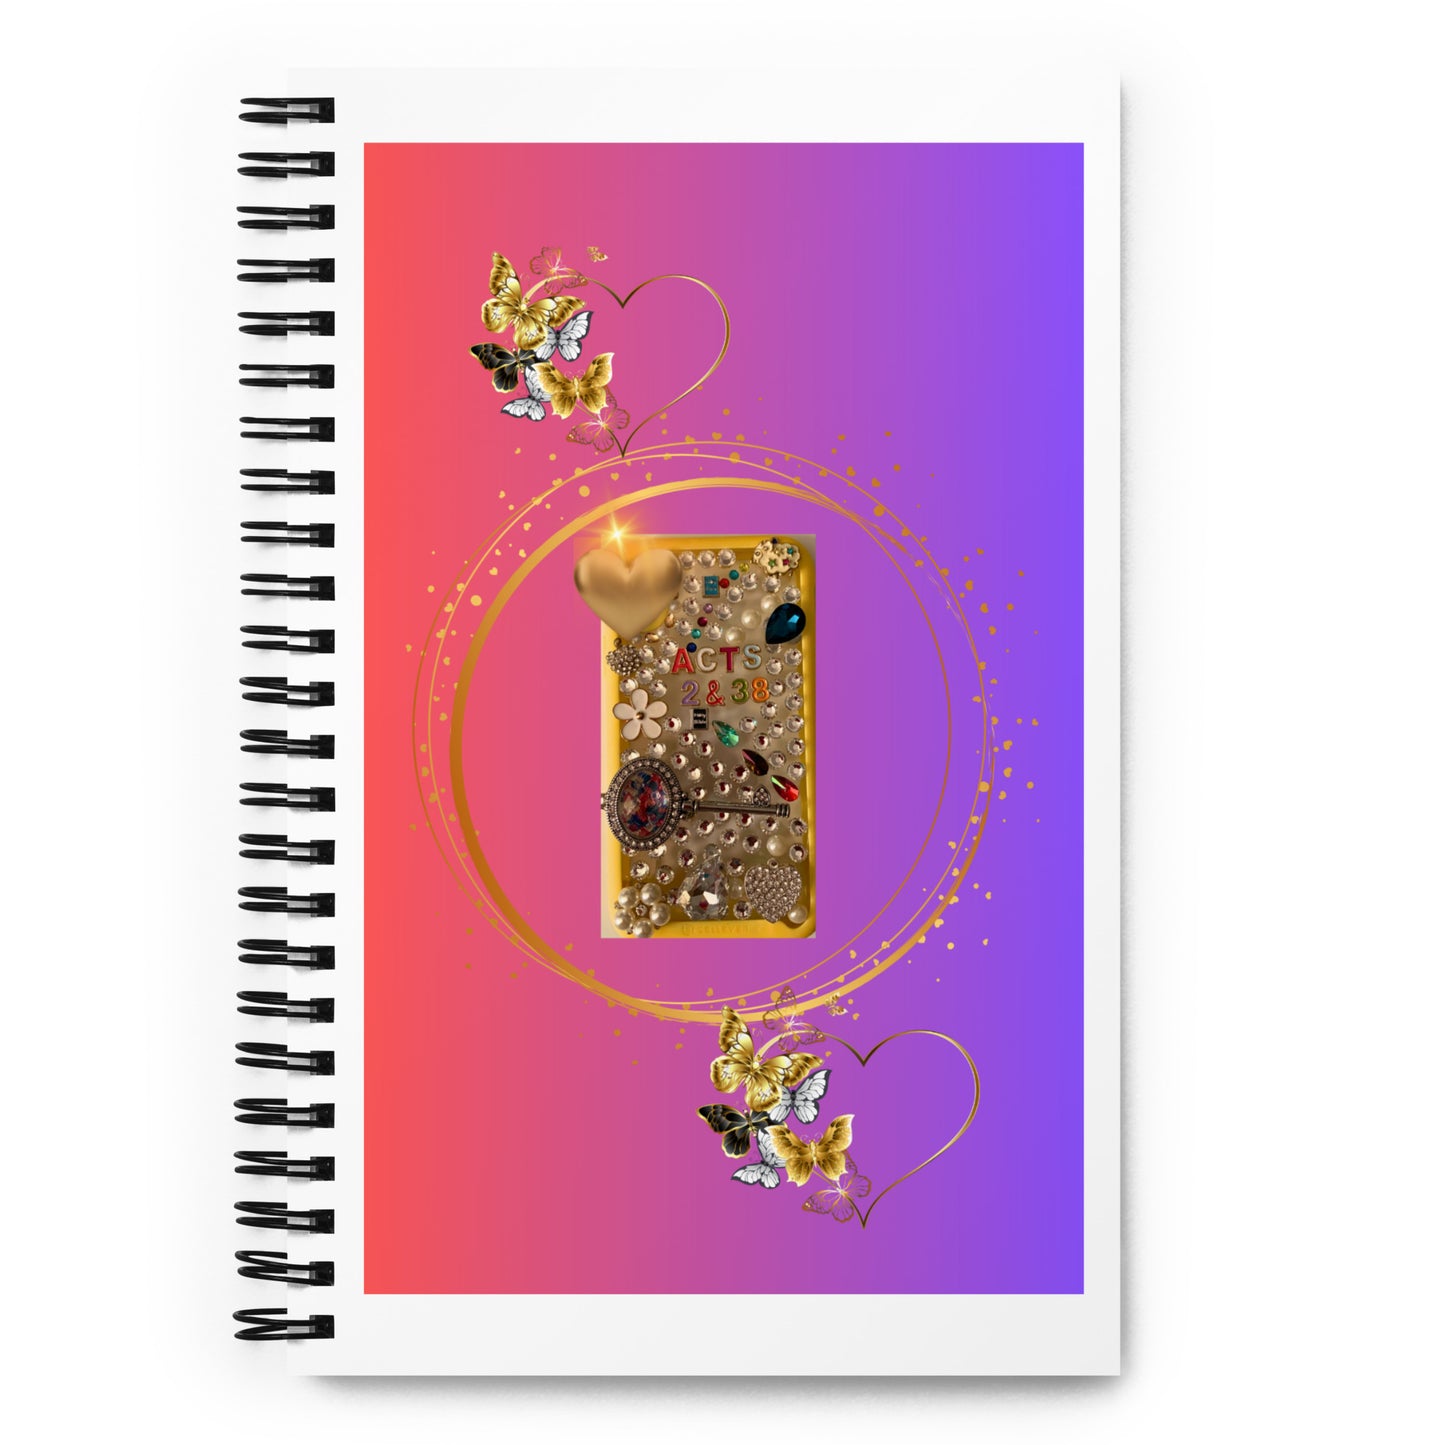 By Faith Acts 2:38 Spiral Notebook